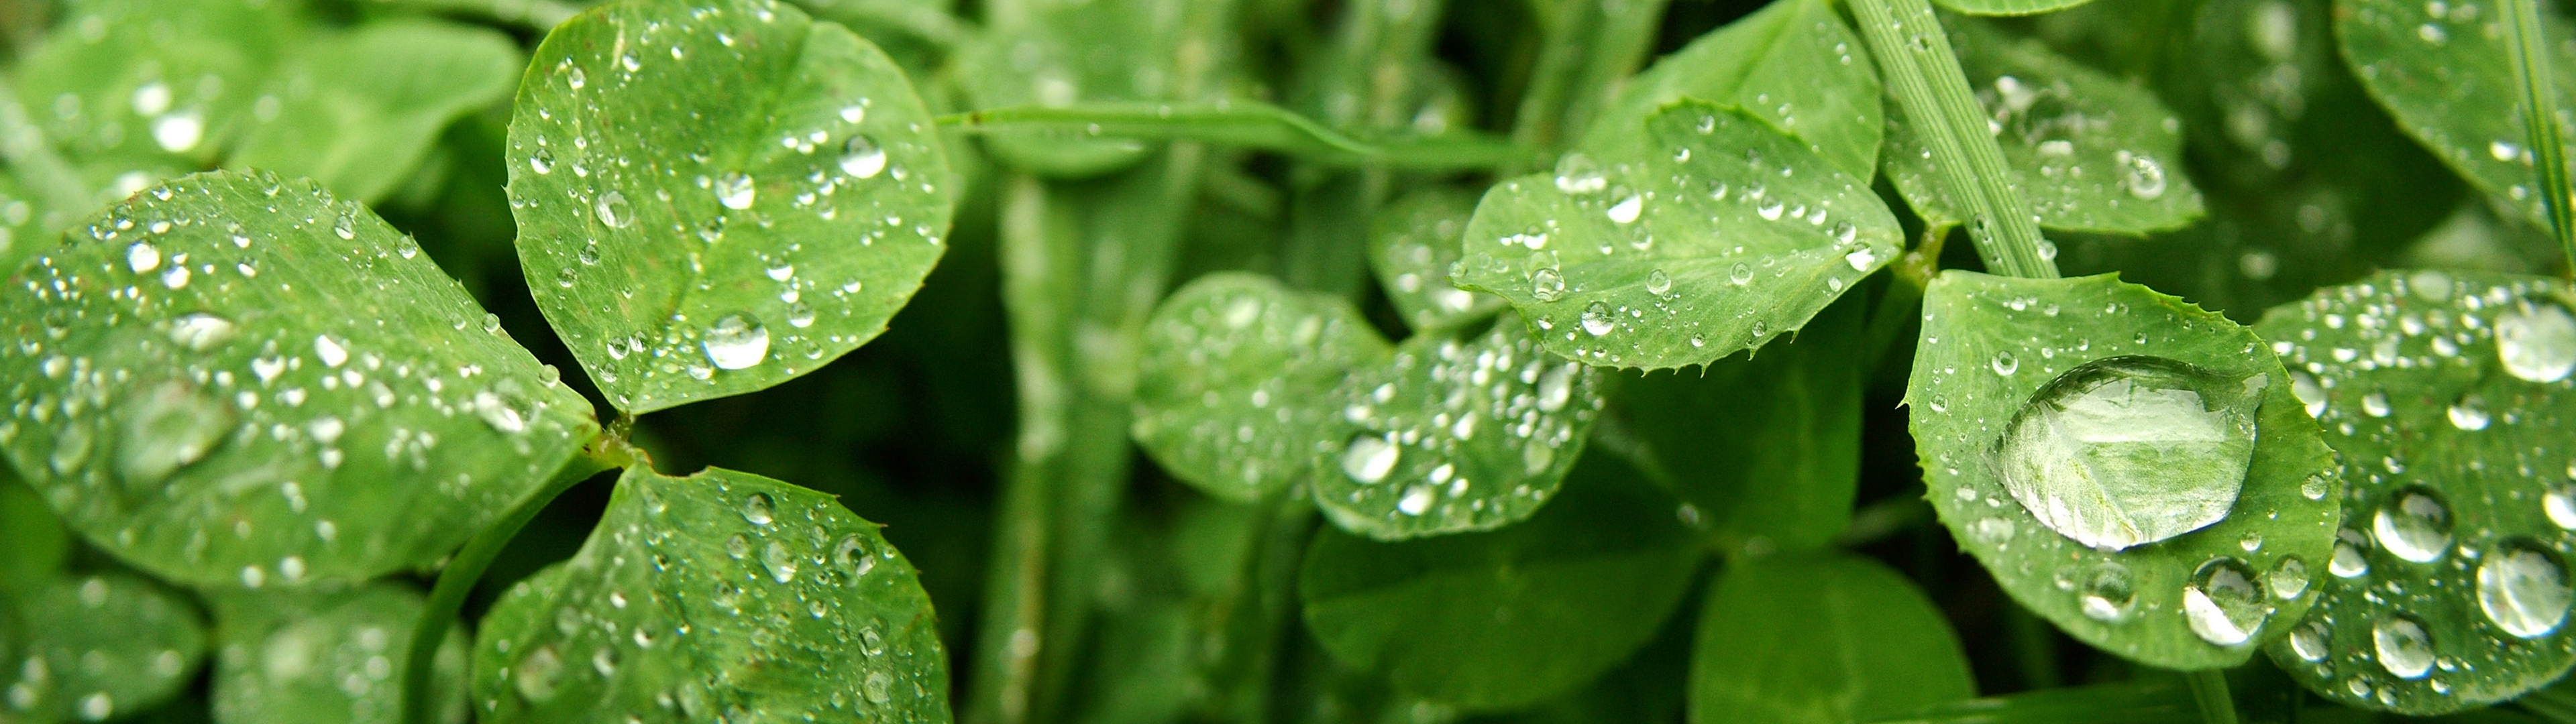 close up, Leaves, Water, Drops, Clover Wallpaper